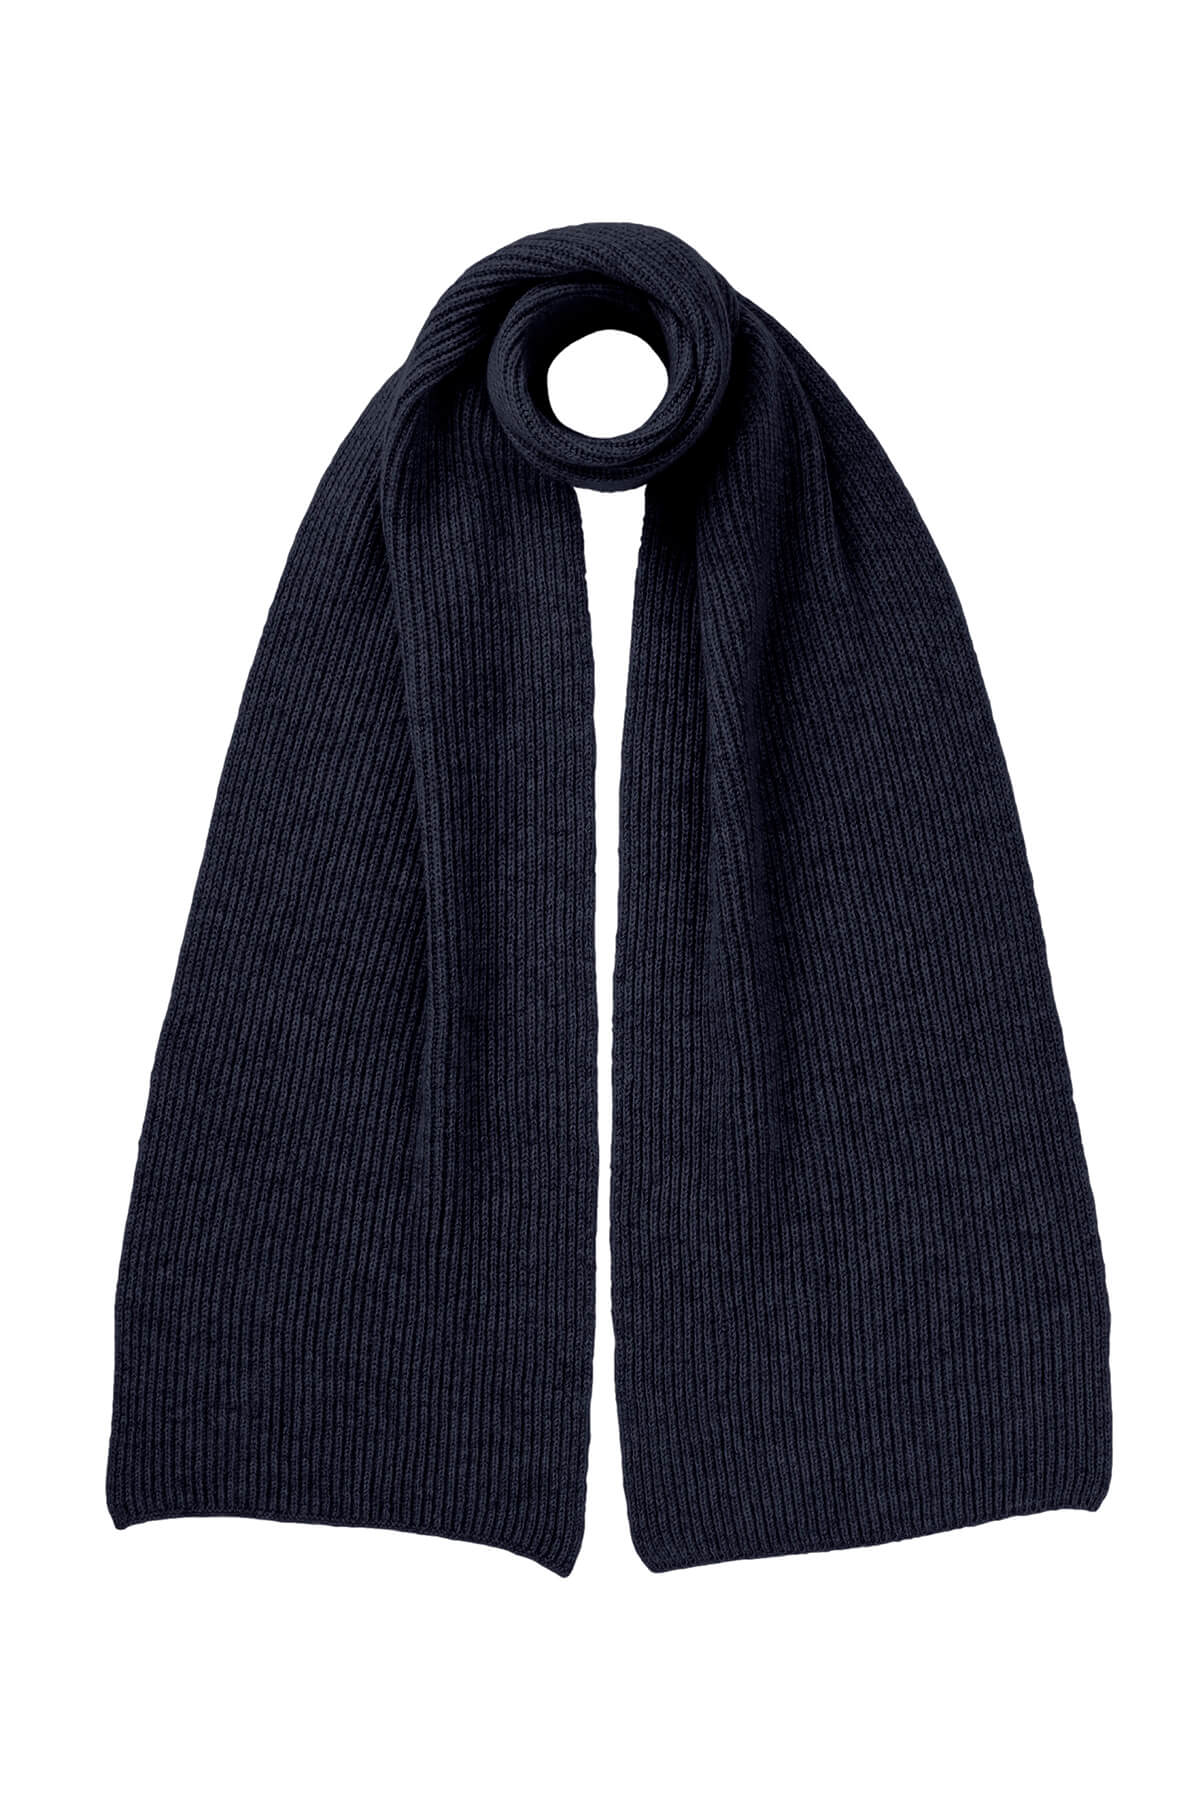  Johnstons of Elgin’s Ribbed Cashmere Scarf Giftset in Navy on a grey background AW23GIFTSET6B